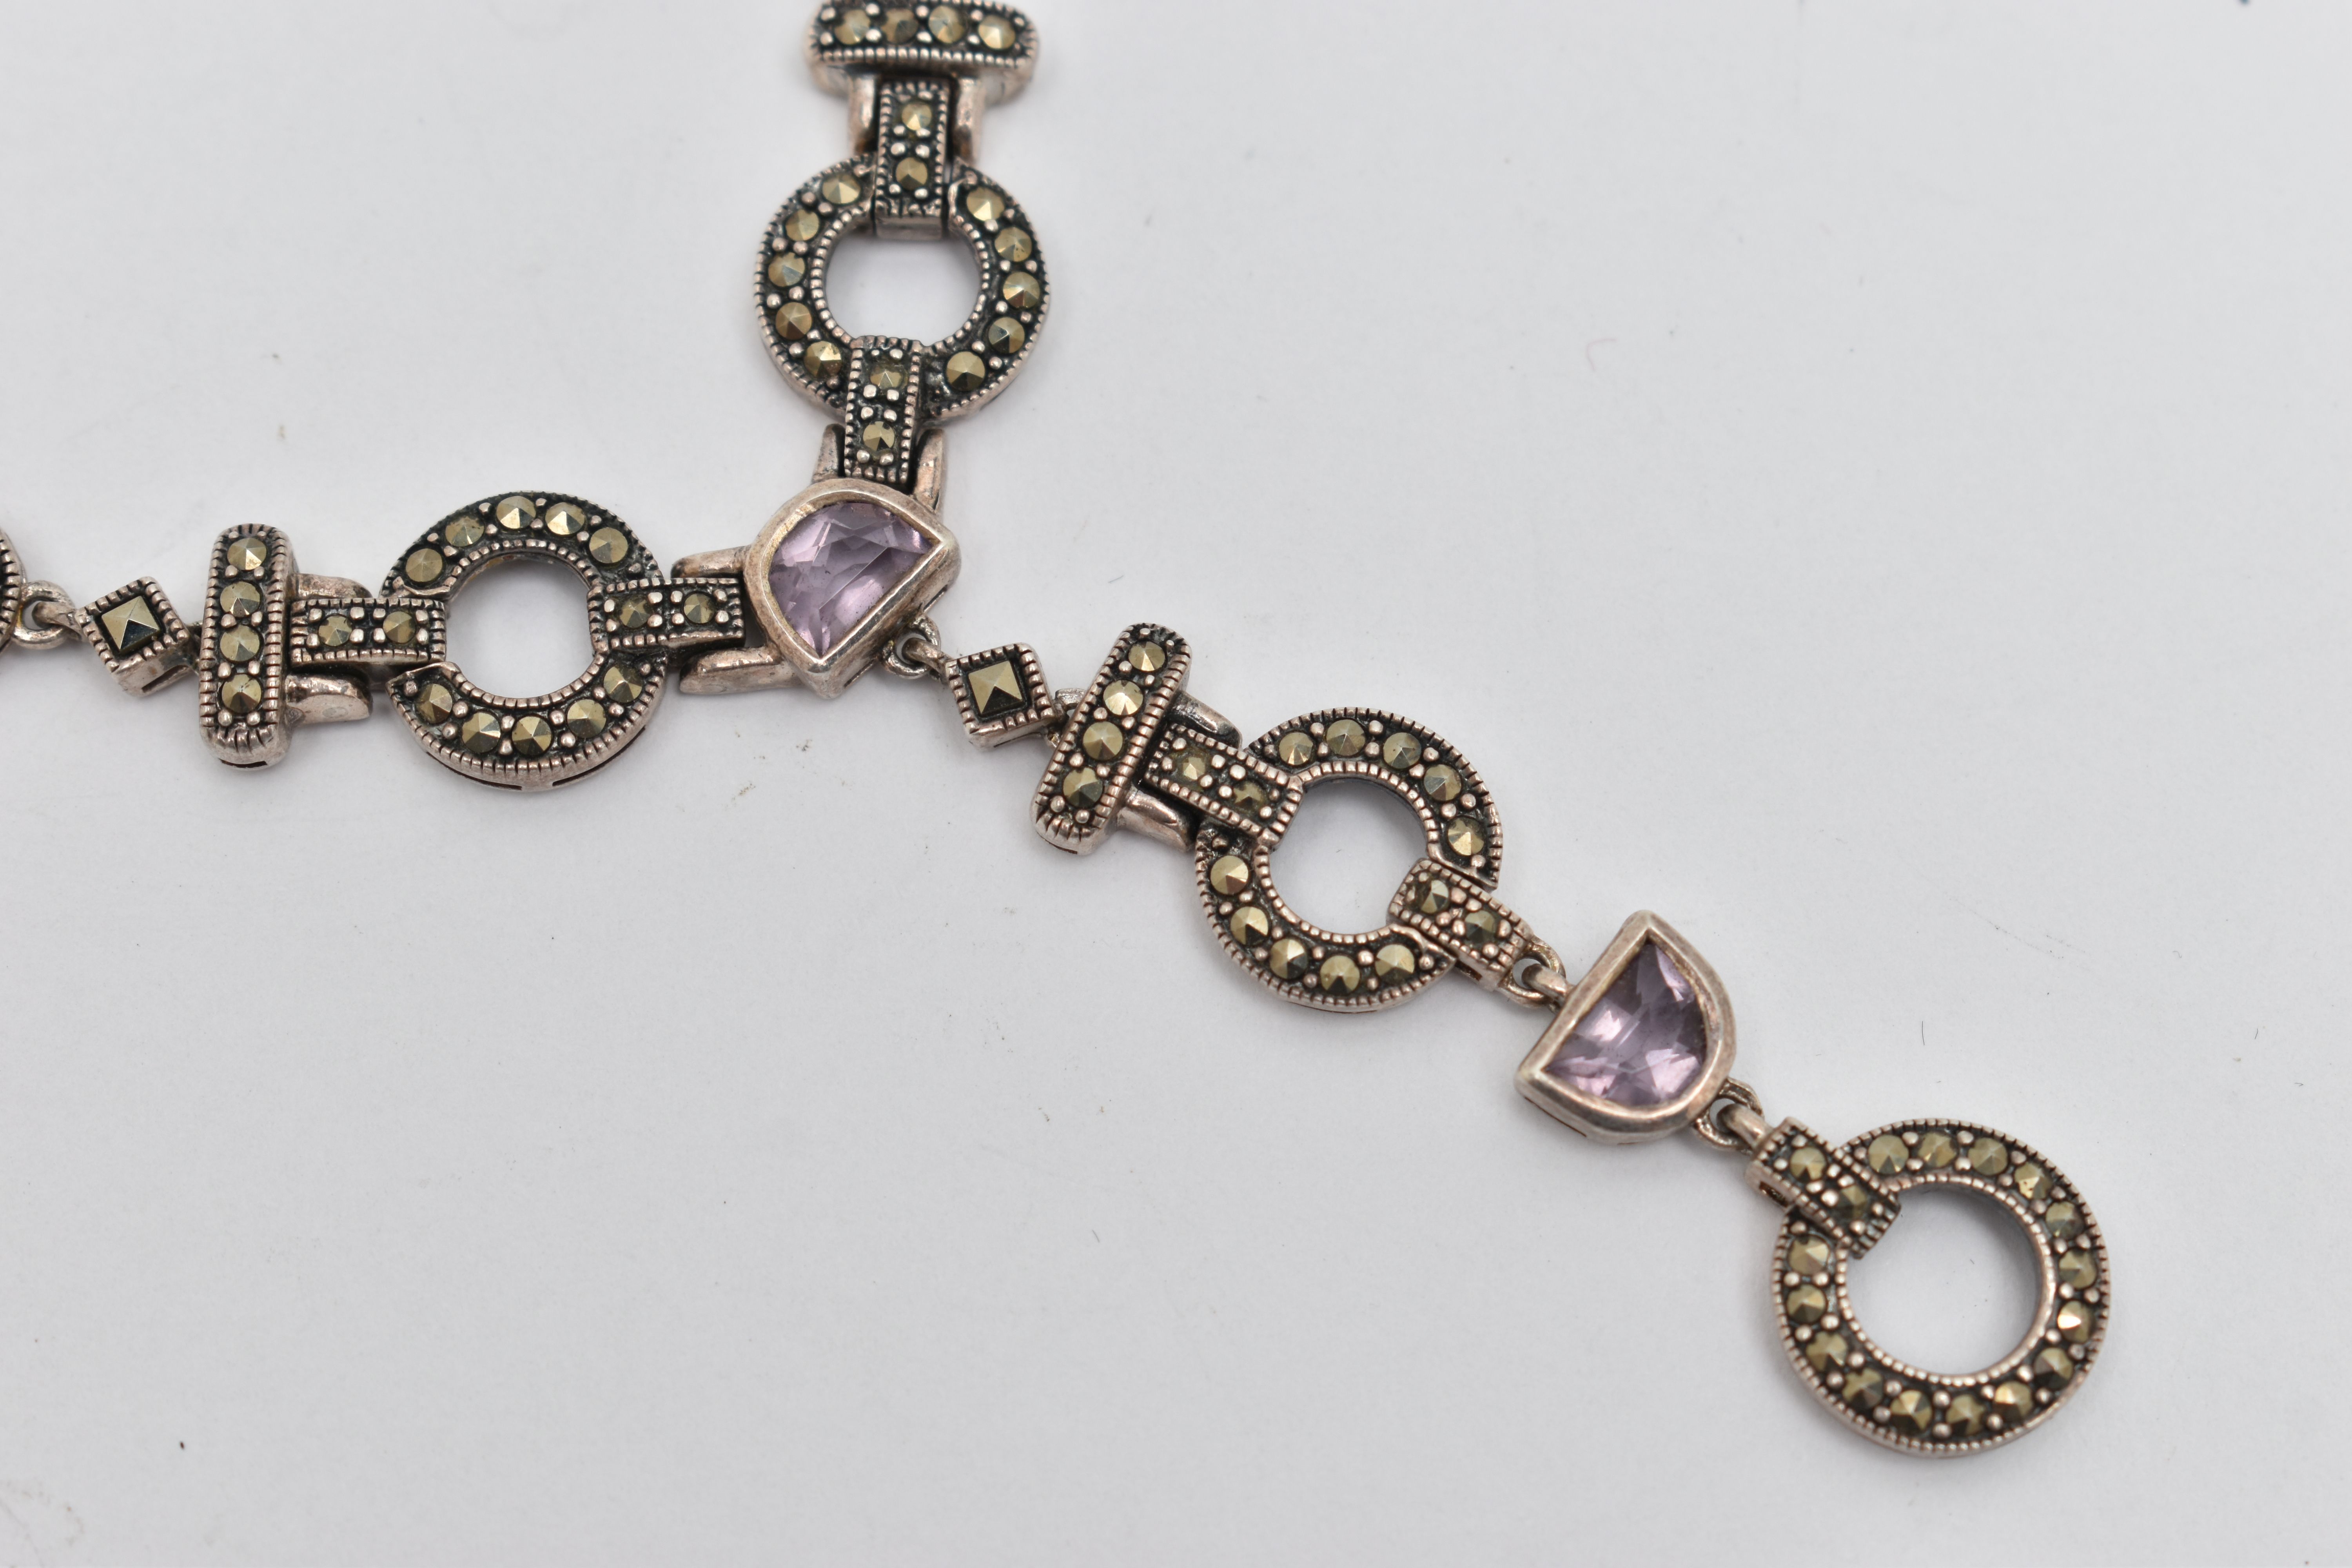 A MARCASITE AND AMETHYST NECKLACE, designed as circular, square and rectangular links joining at a - Image 2 of 5